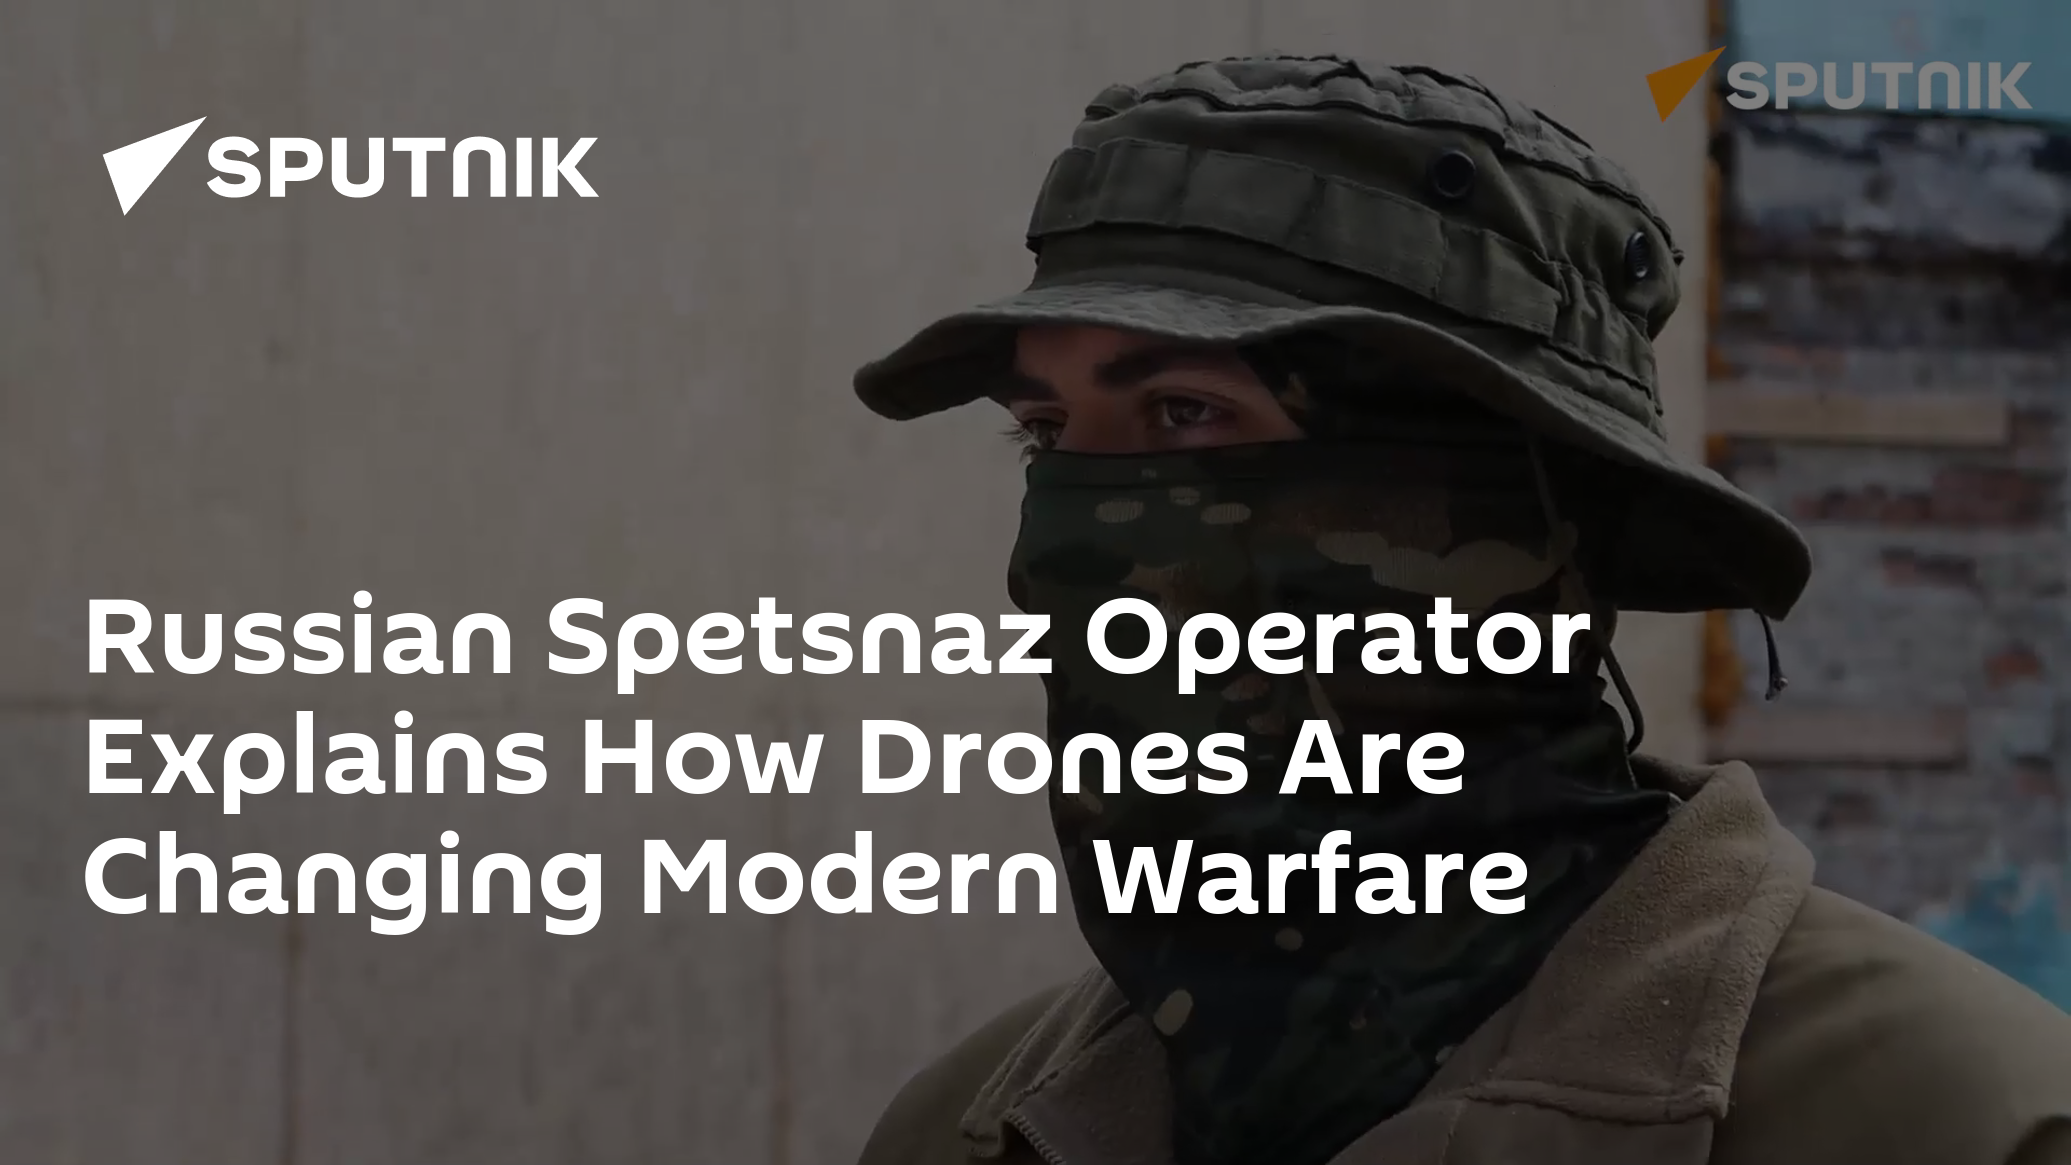 Russian Spetsnaz Operator Explains How Drones Are Changing Modern Warfare